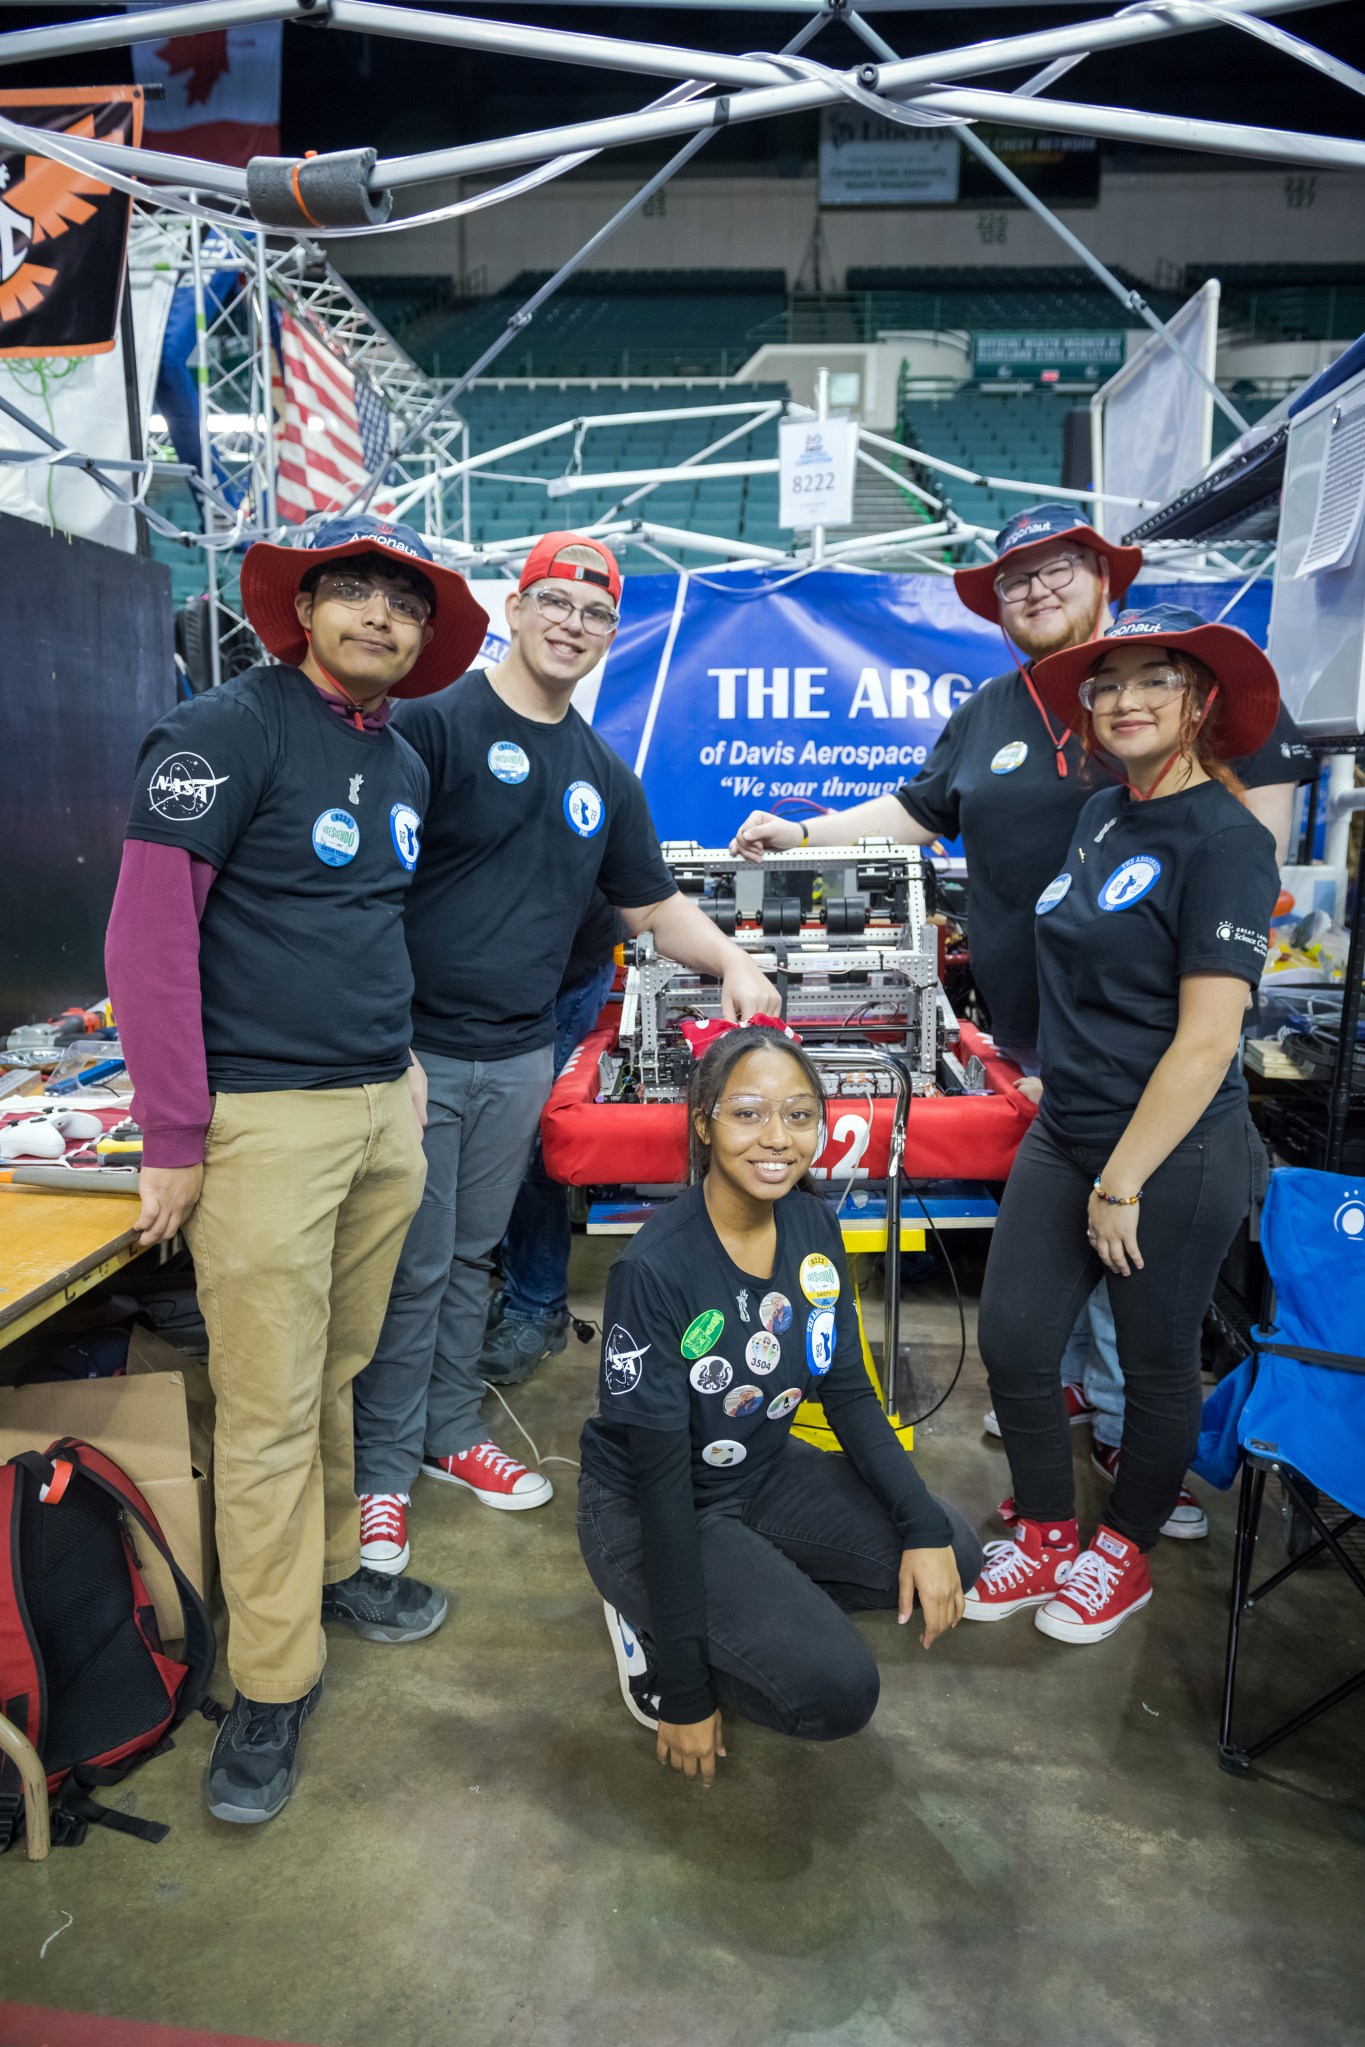 Four students stand and one student crouches down on the floor in front of their robot. The team’s name is partially shown on a banner behind them.